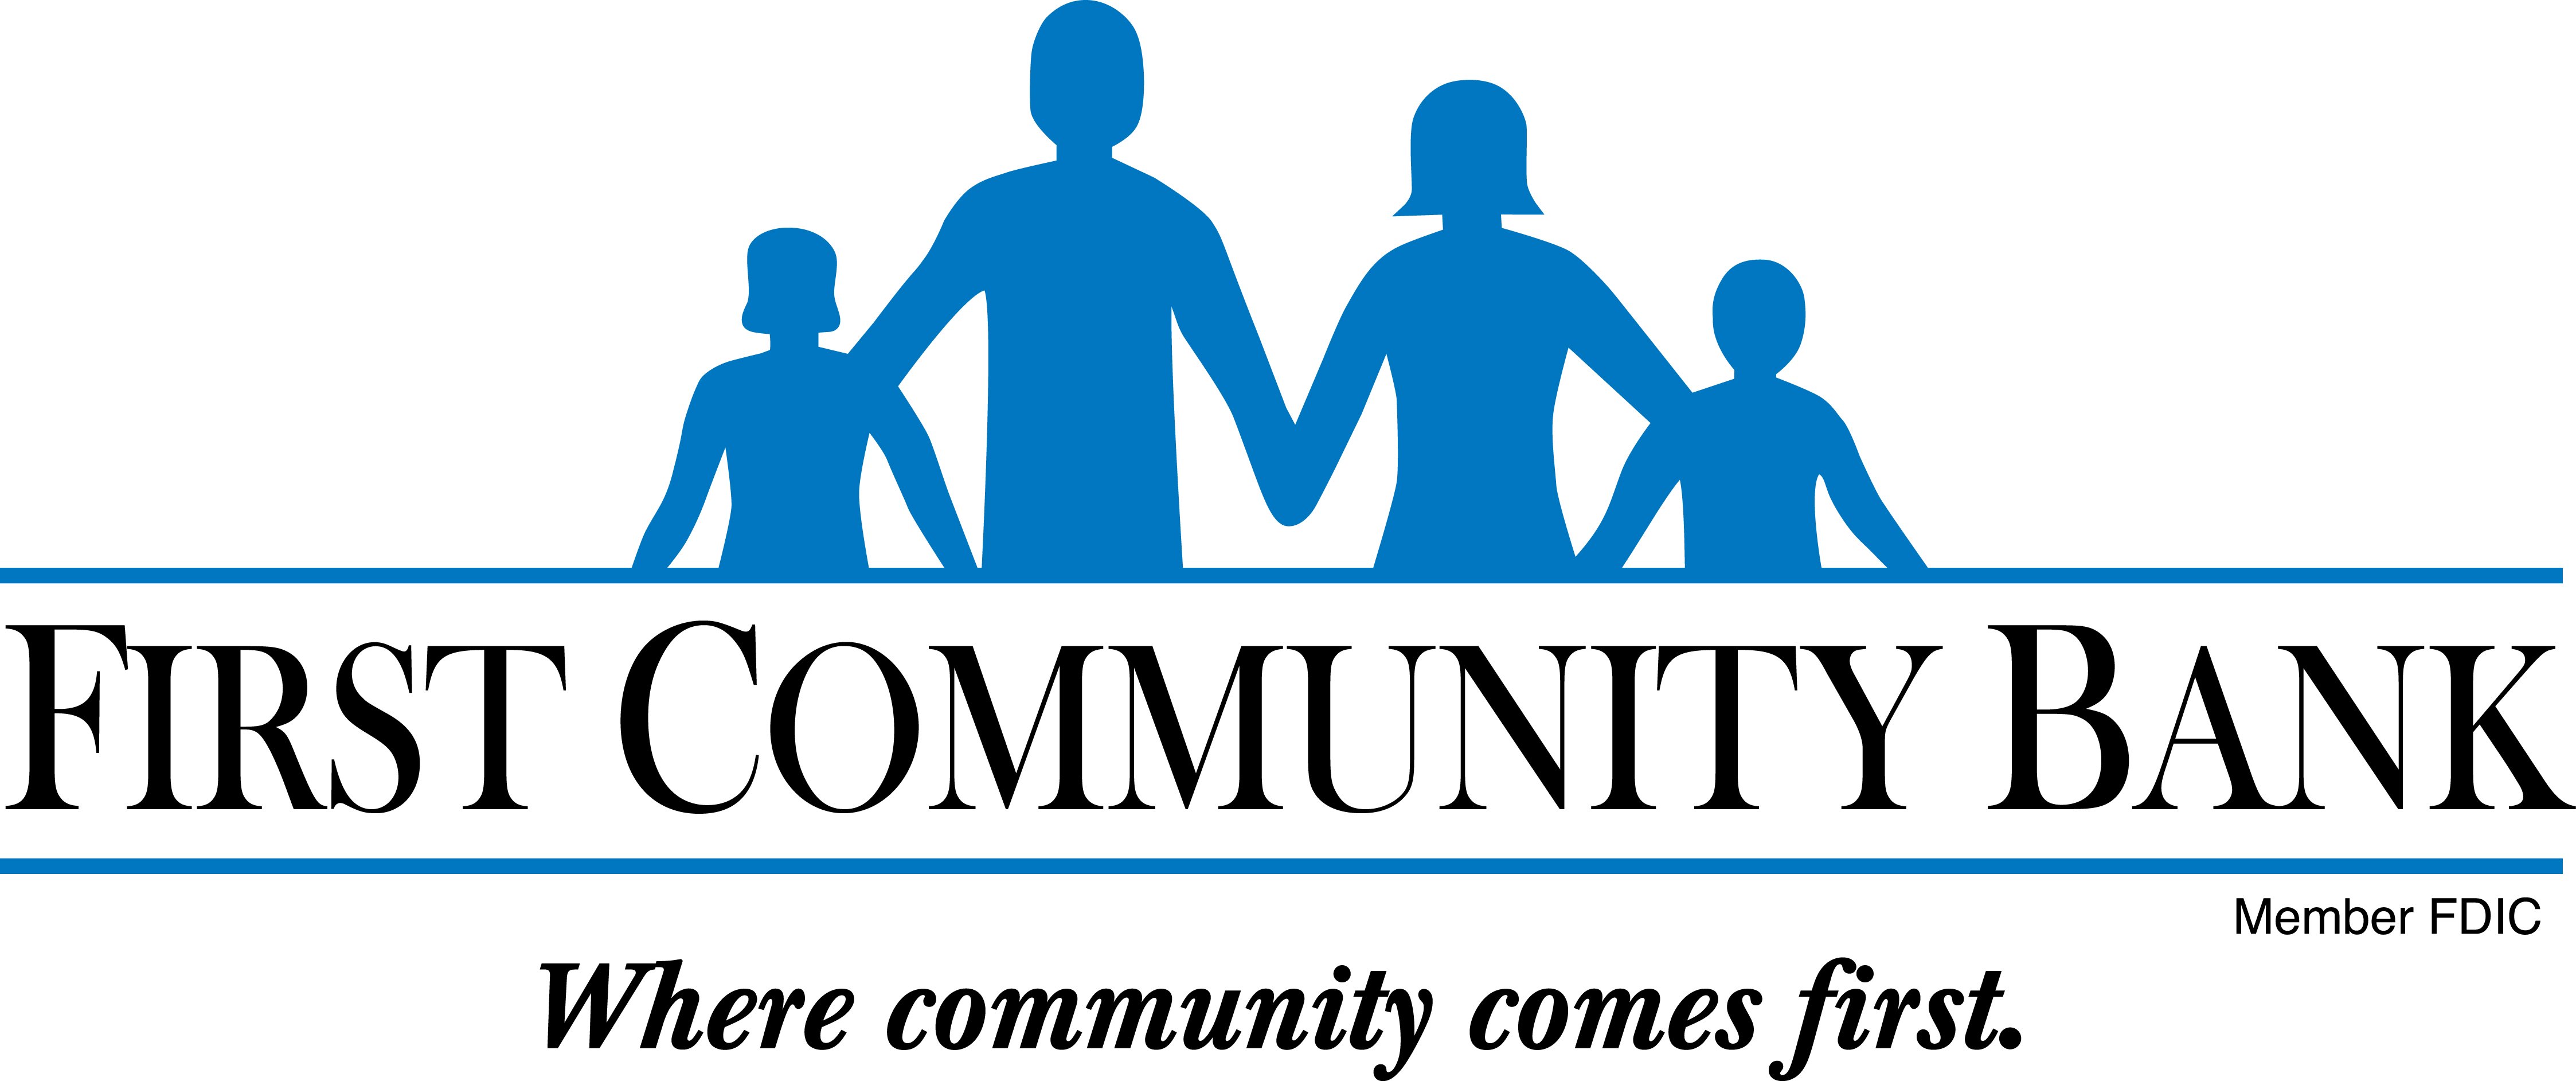 Trademark Logo FIRST COMMUNITY BANK WHERE COMMUNITY COMES FIRST. MEMBER FDIC